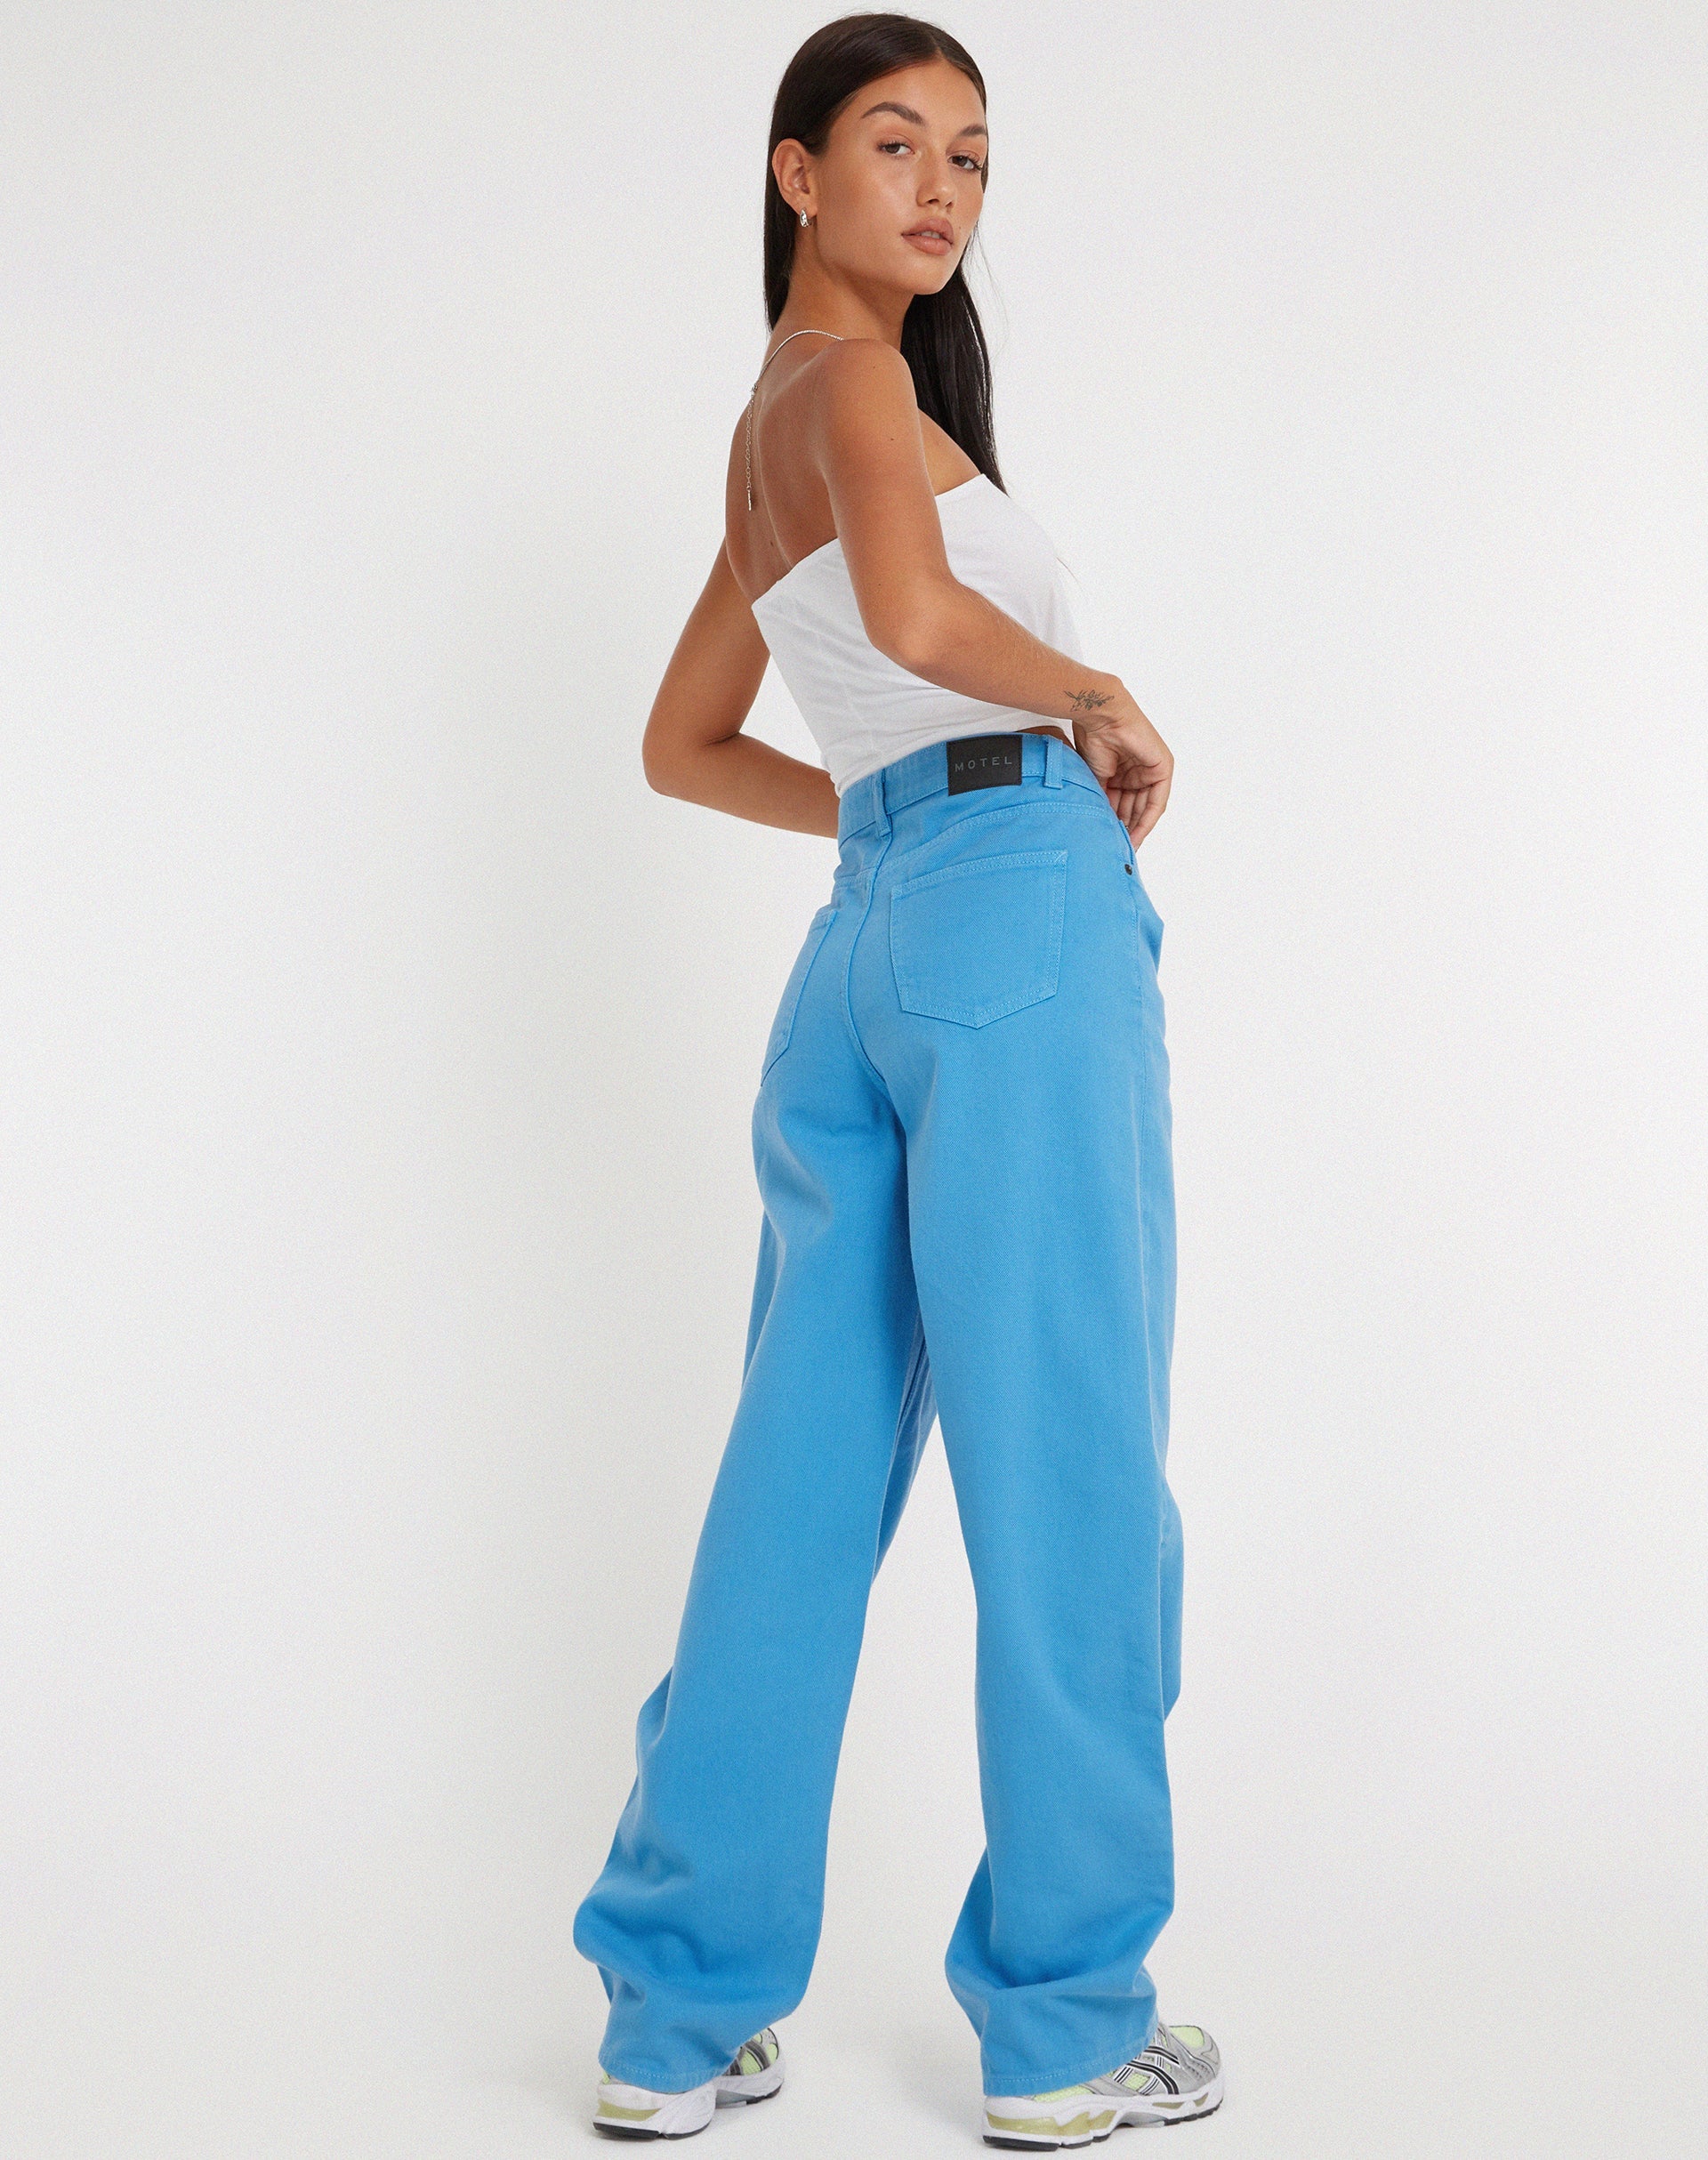 image of Parallel Jeans in Azure Blue